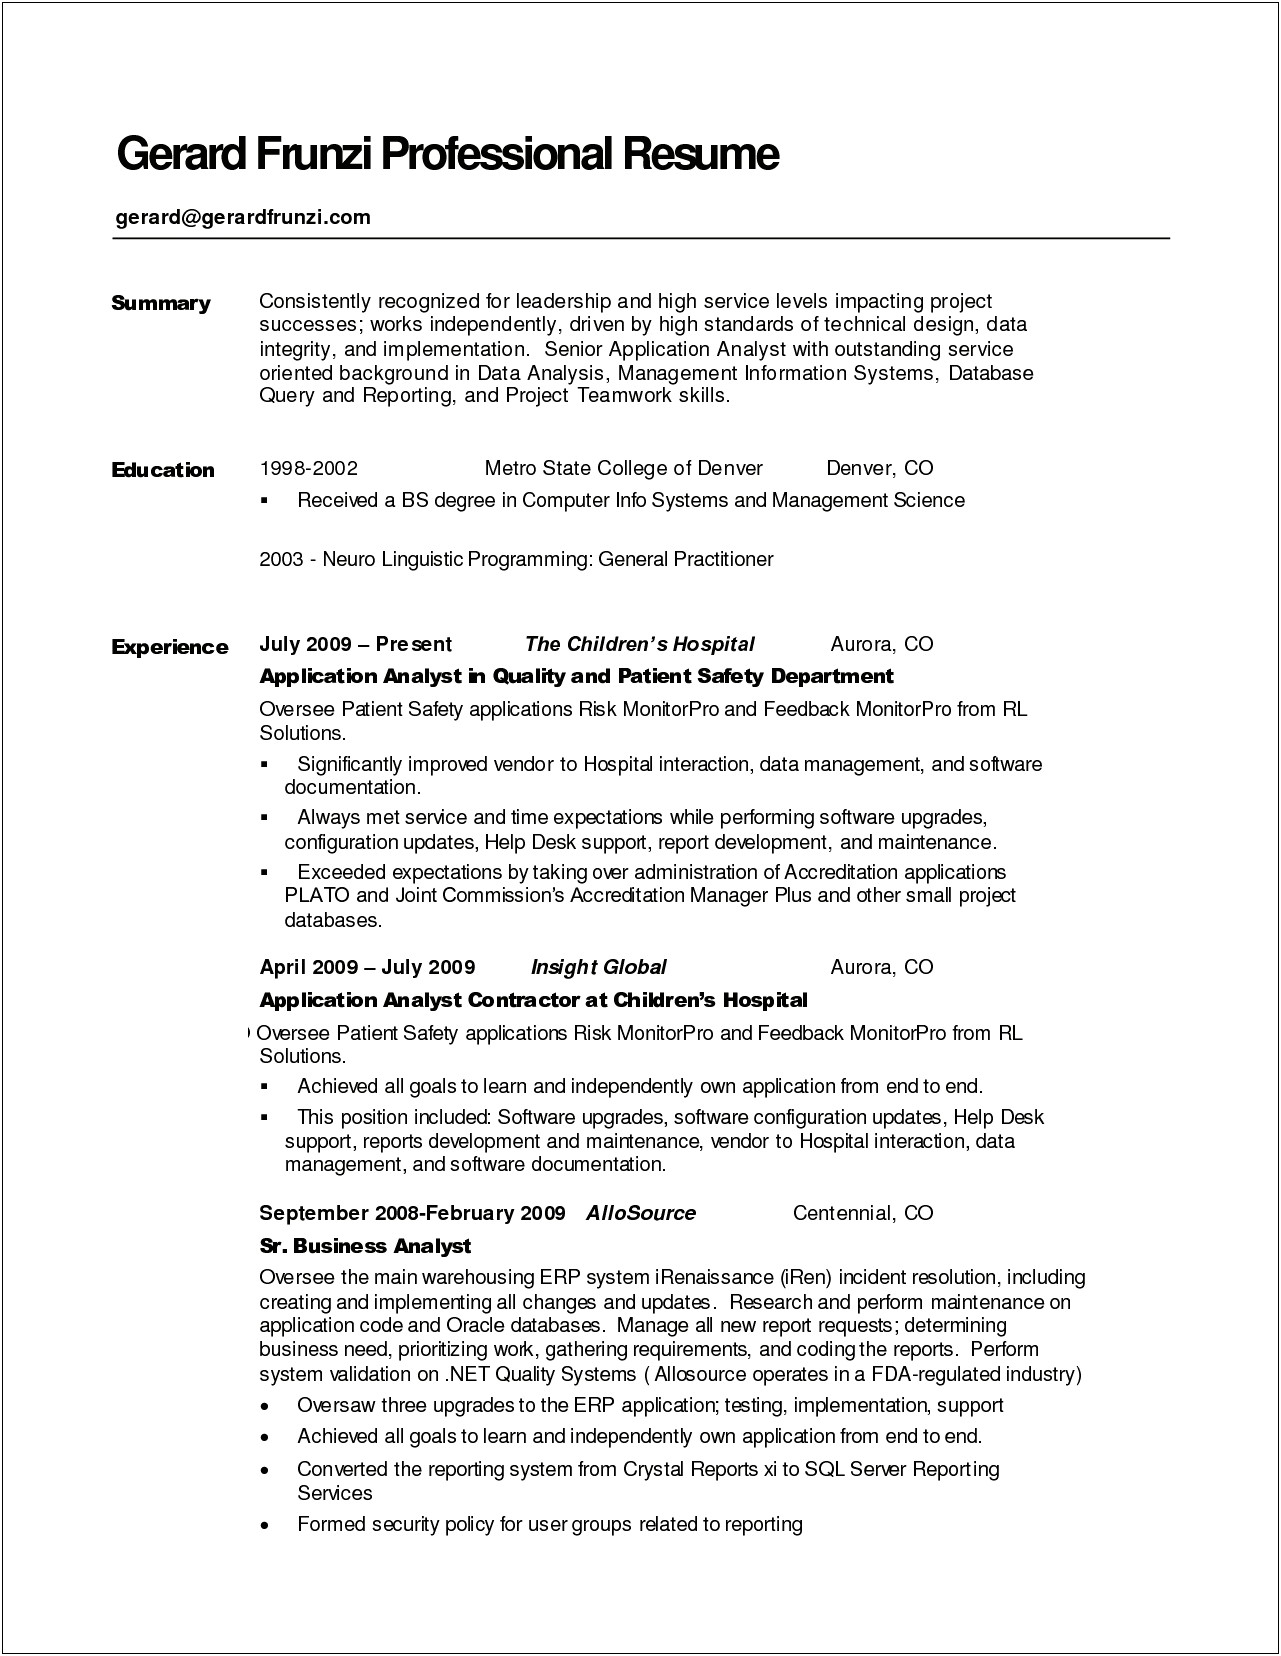 Samples Of Personal Brand Statements On Resumes